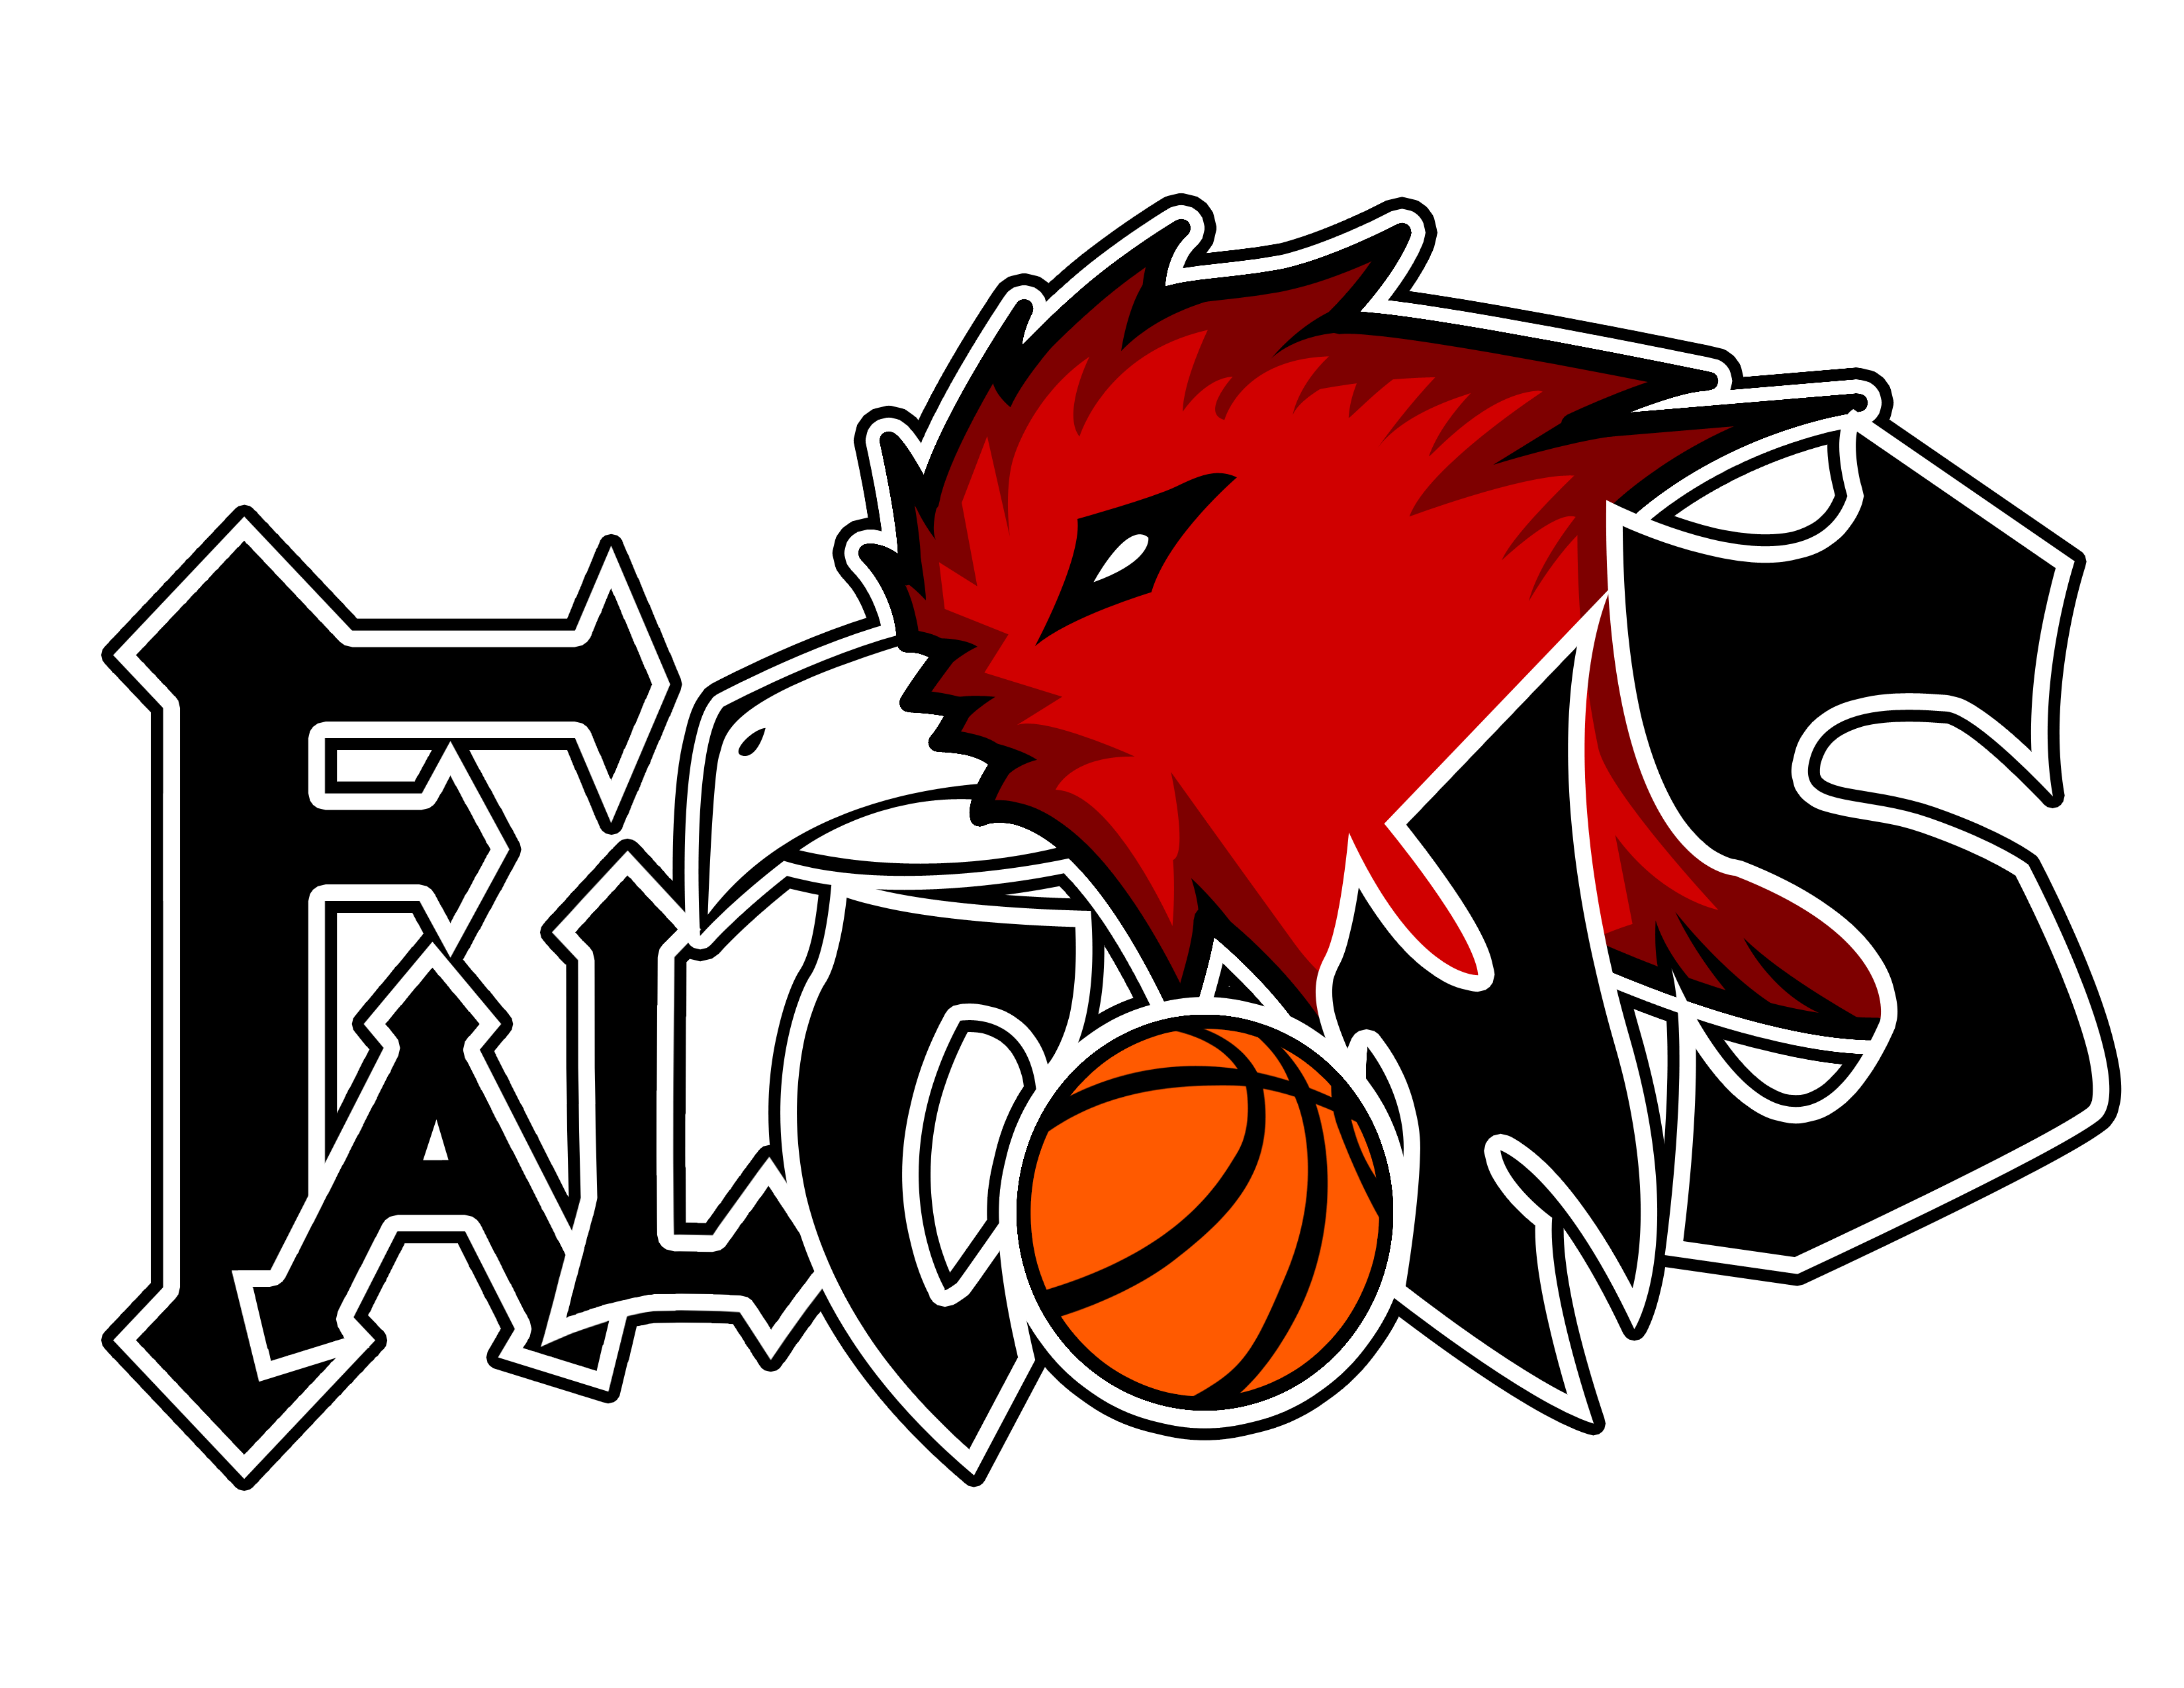 Red and Black Basketball Logo - Falcons basketball picture black and white download - RR collections